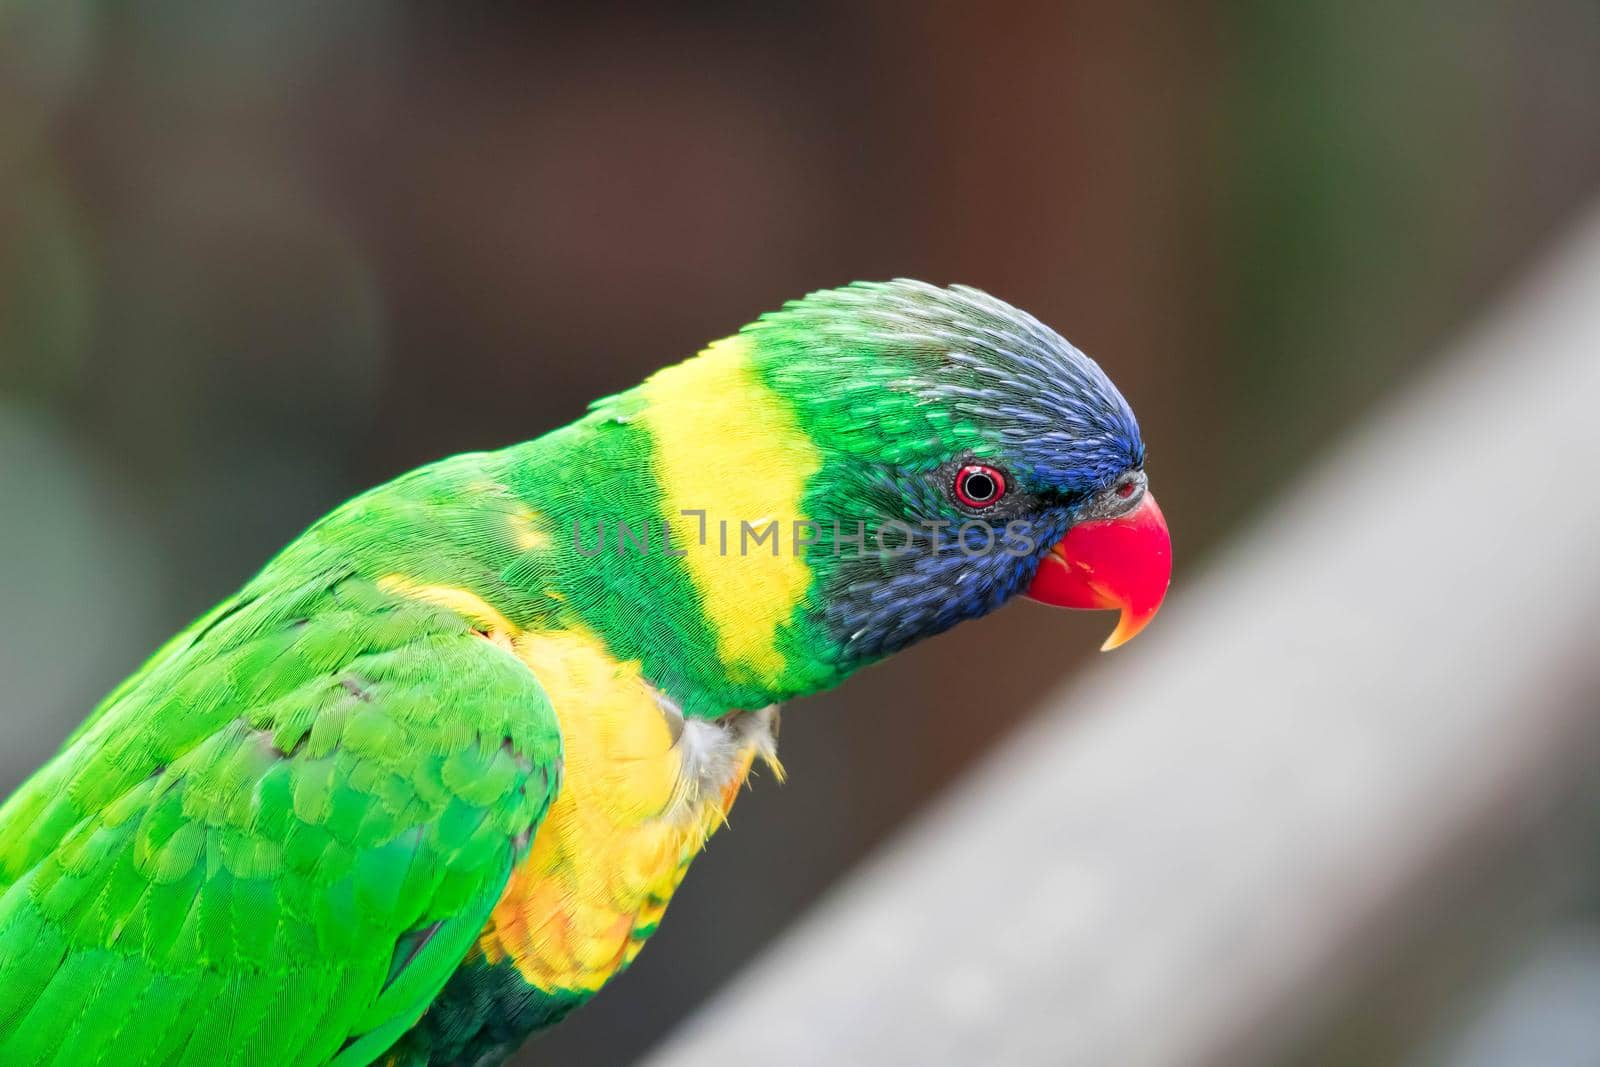 A Rainbow Lorikeet, a species of parrot from Australia. Trichoglossus moluccanus